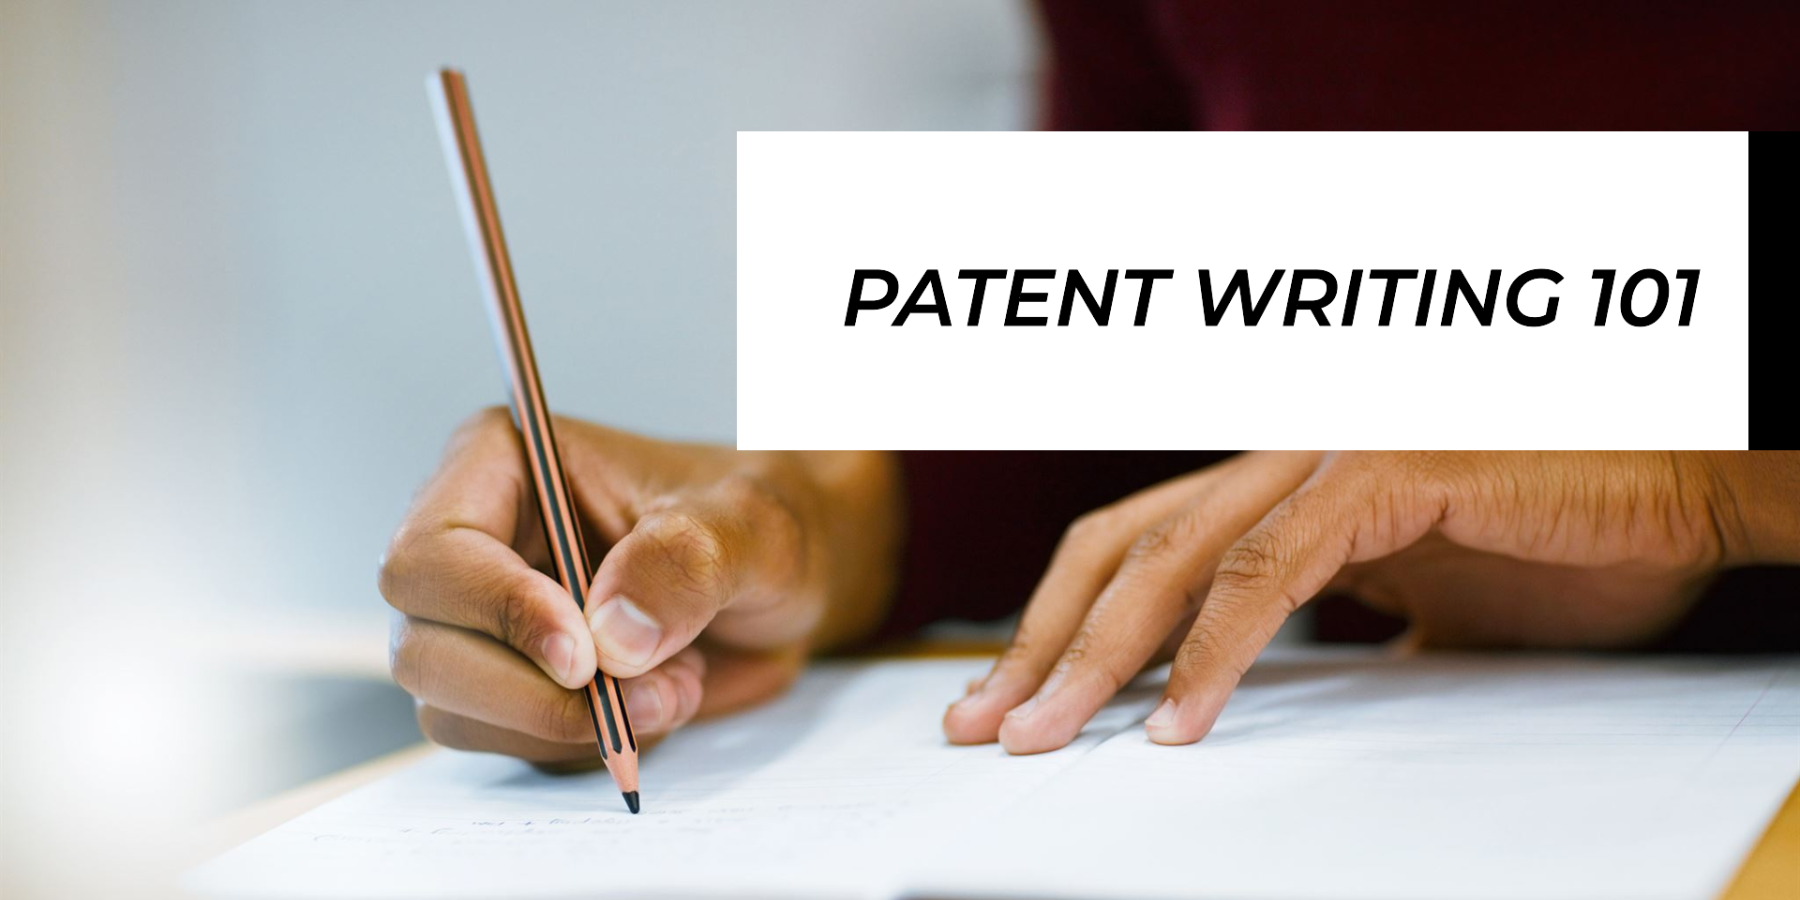 a person writing a patent holding a pencil